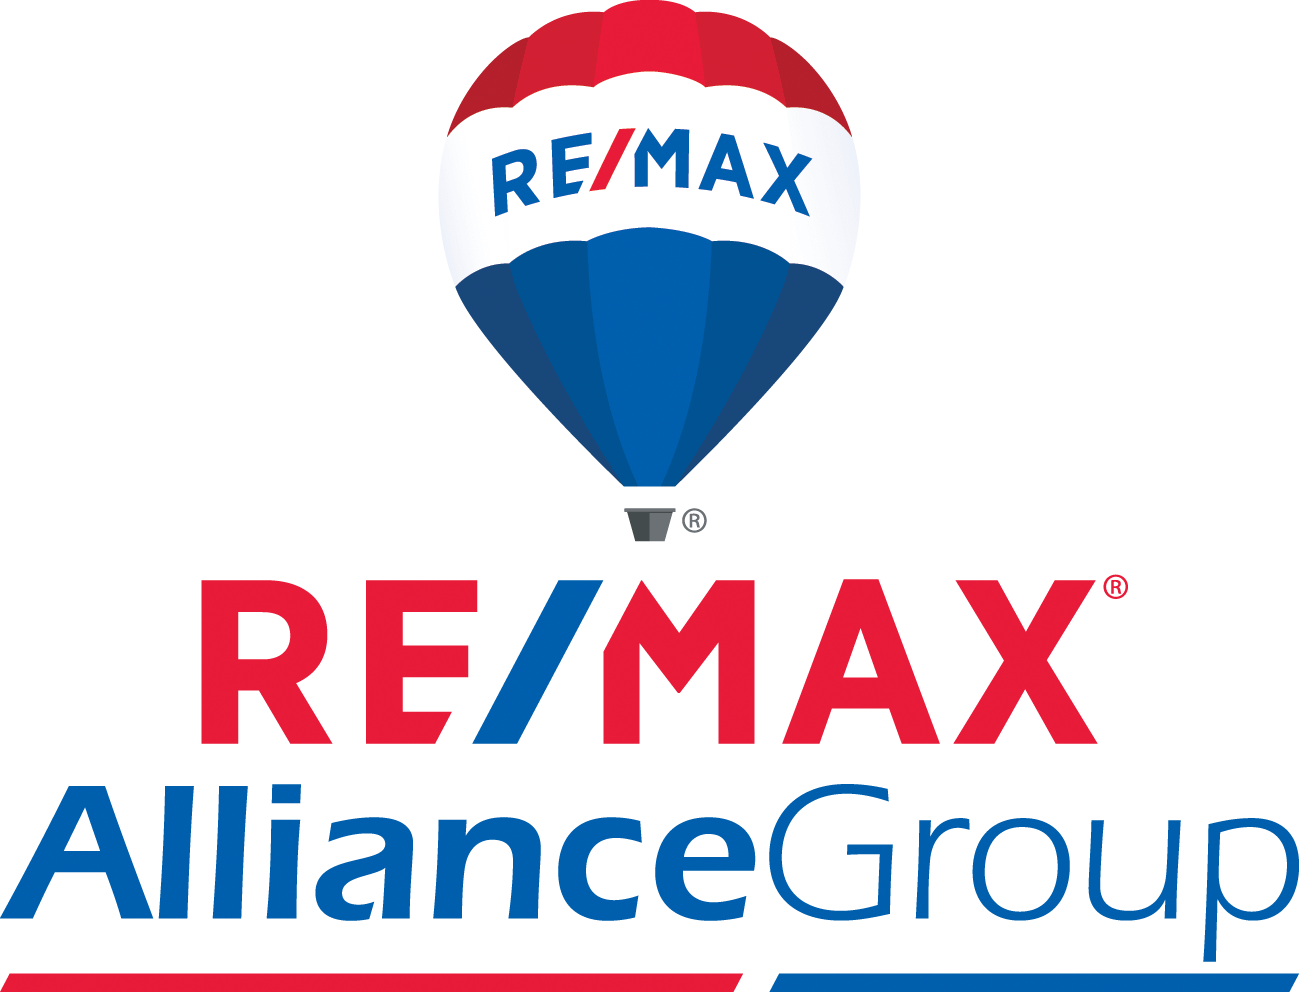 Re/max alliance group